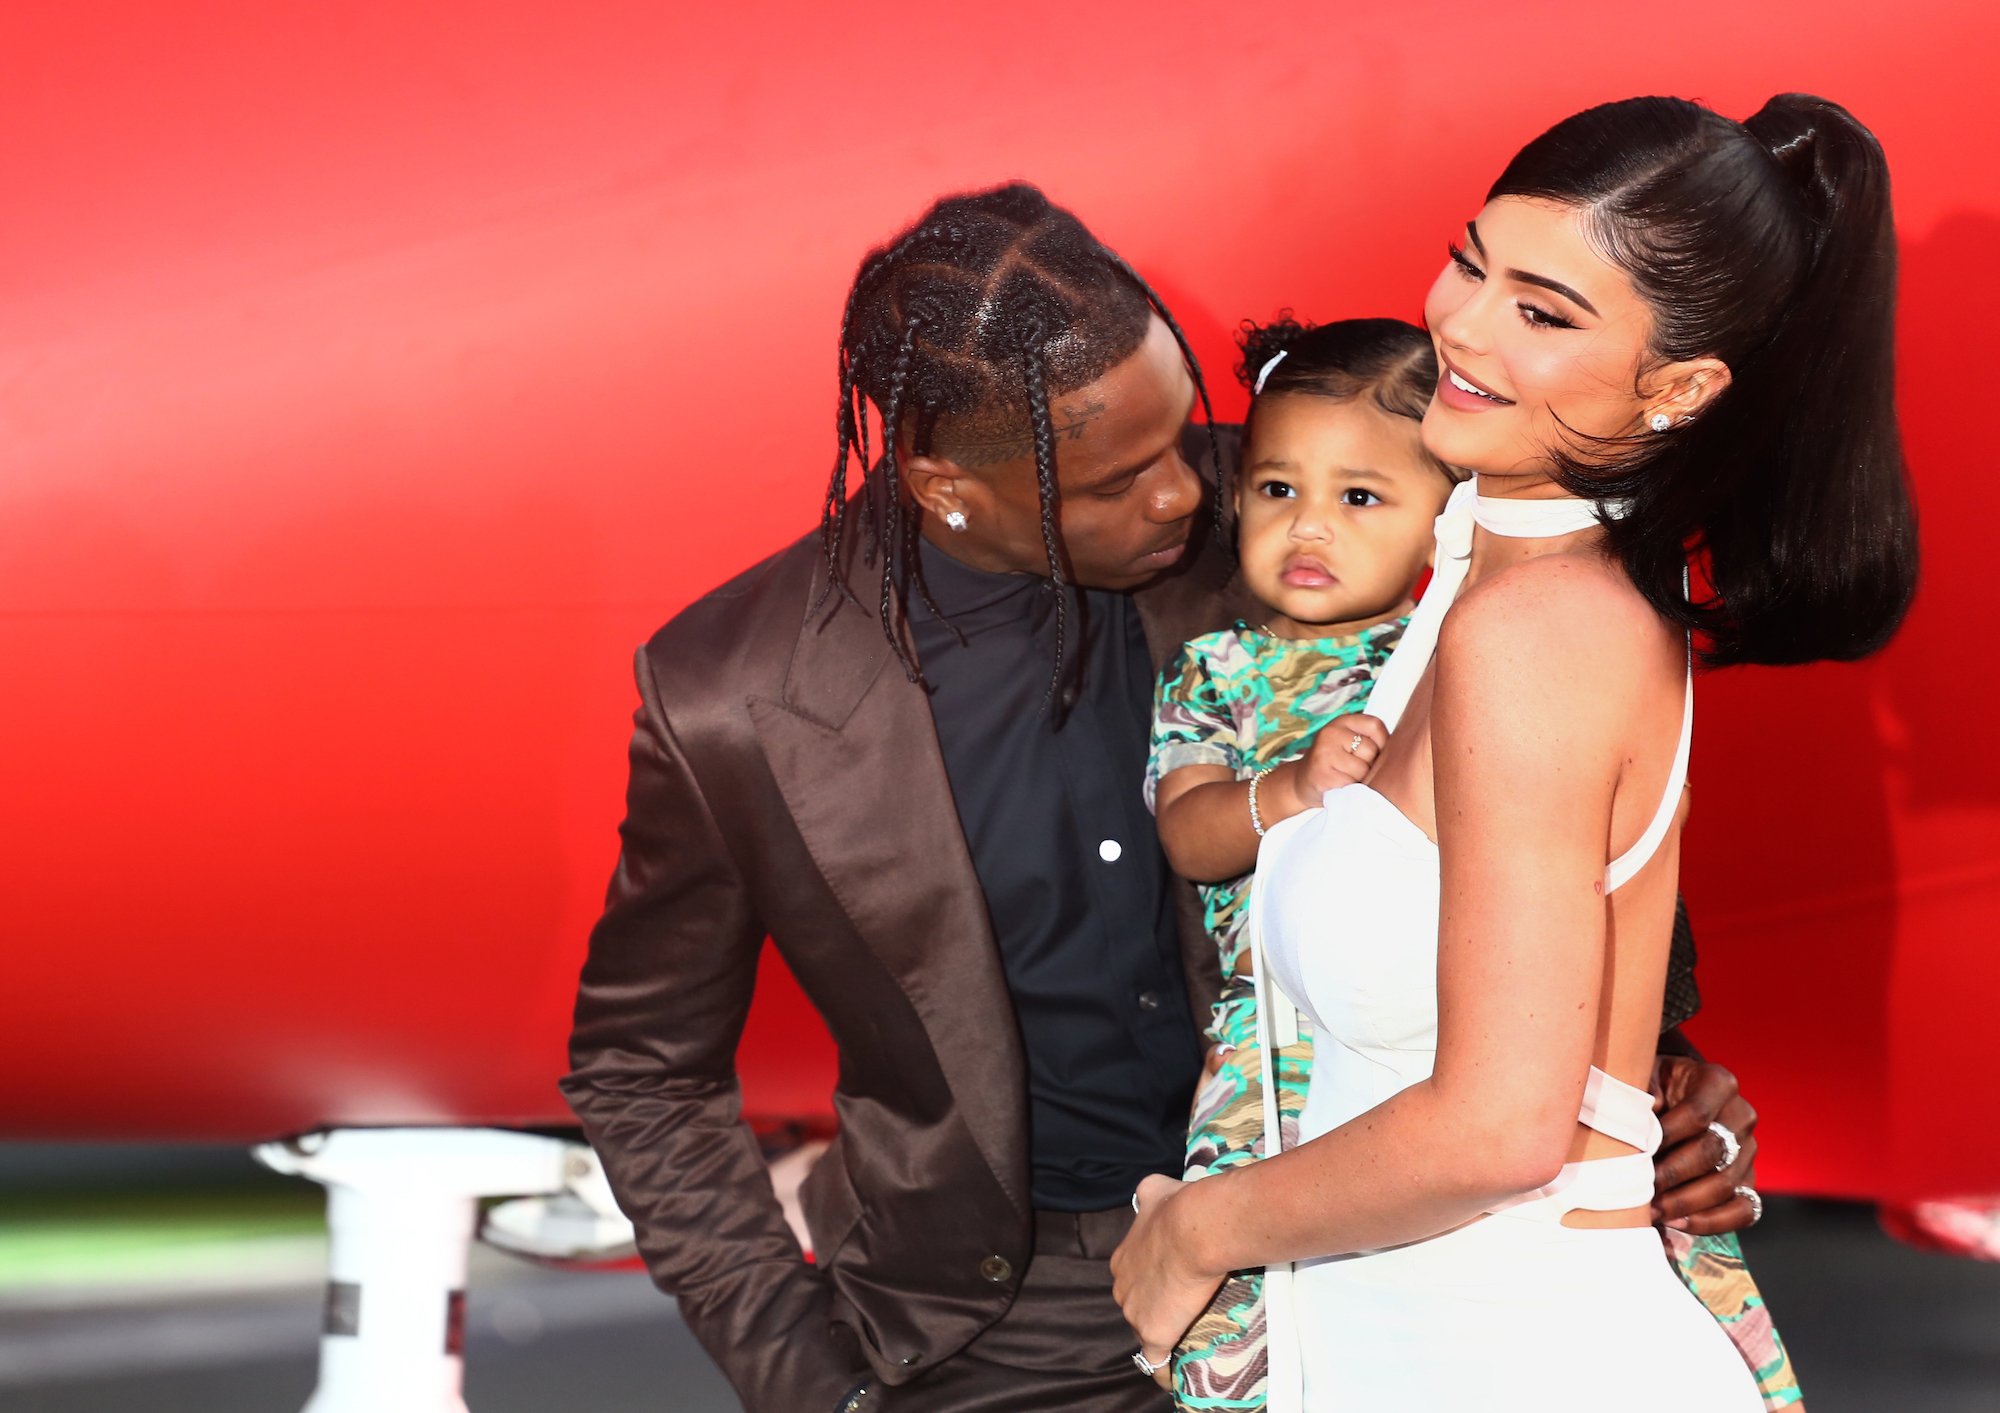 Travis Scott, Stormi Webster, and Kylie Jenner attending the Travis Scott: "Look Mom I Can Fly" Los Angeles Premiere